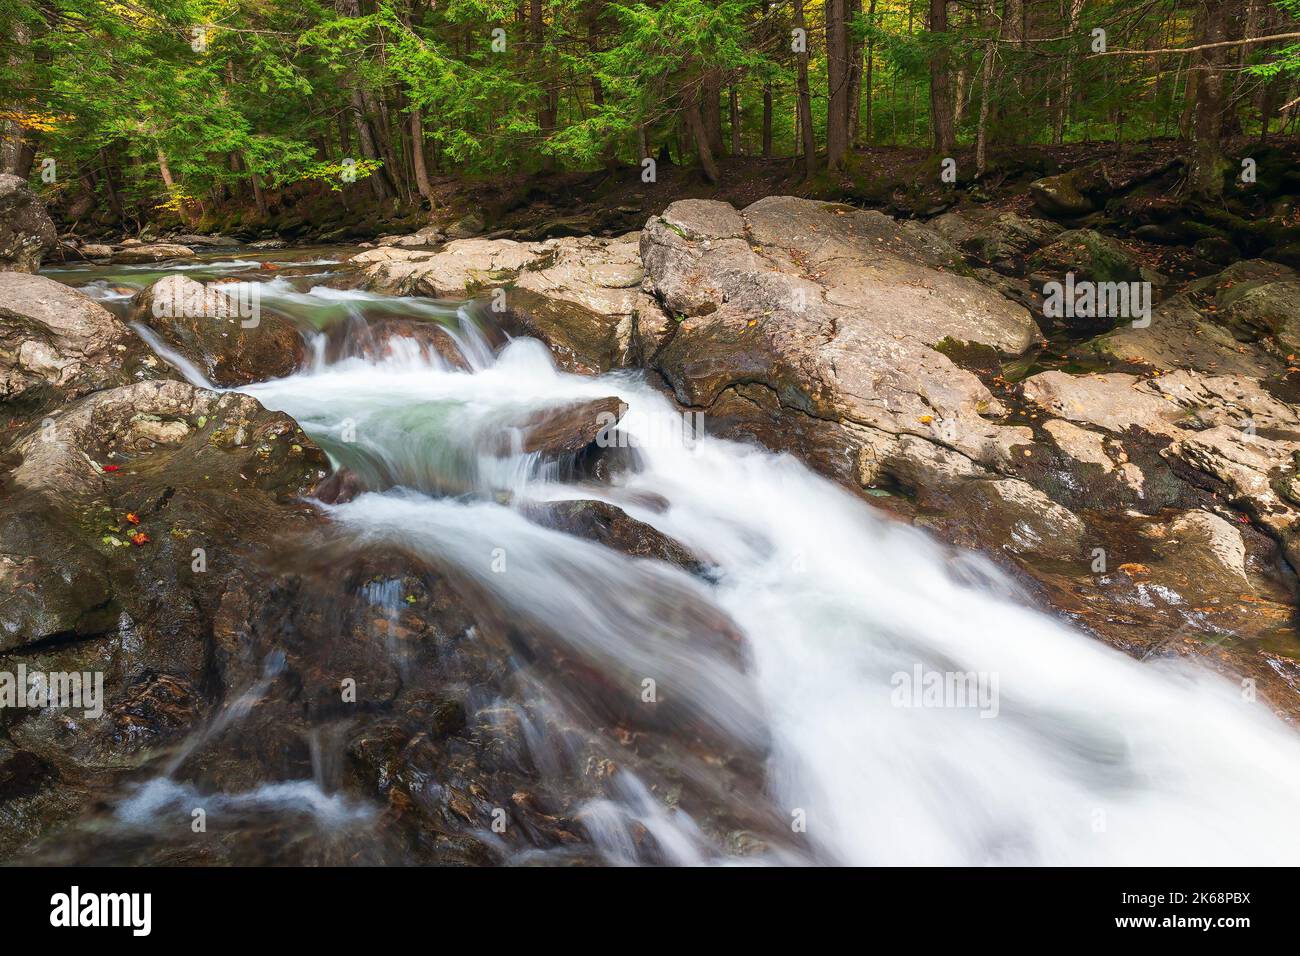 Upper tier of Bingham Falls on Little river. Town of Stowe. Lamoille County. Vermont. USA Stock Photo